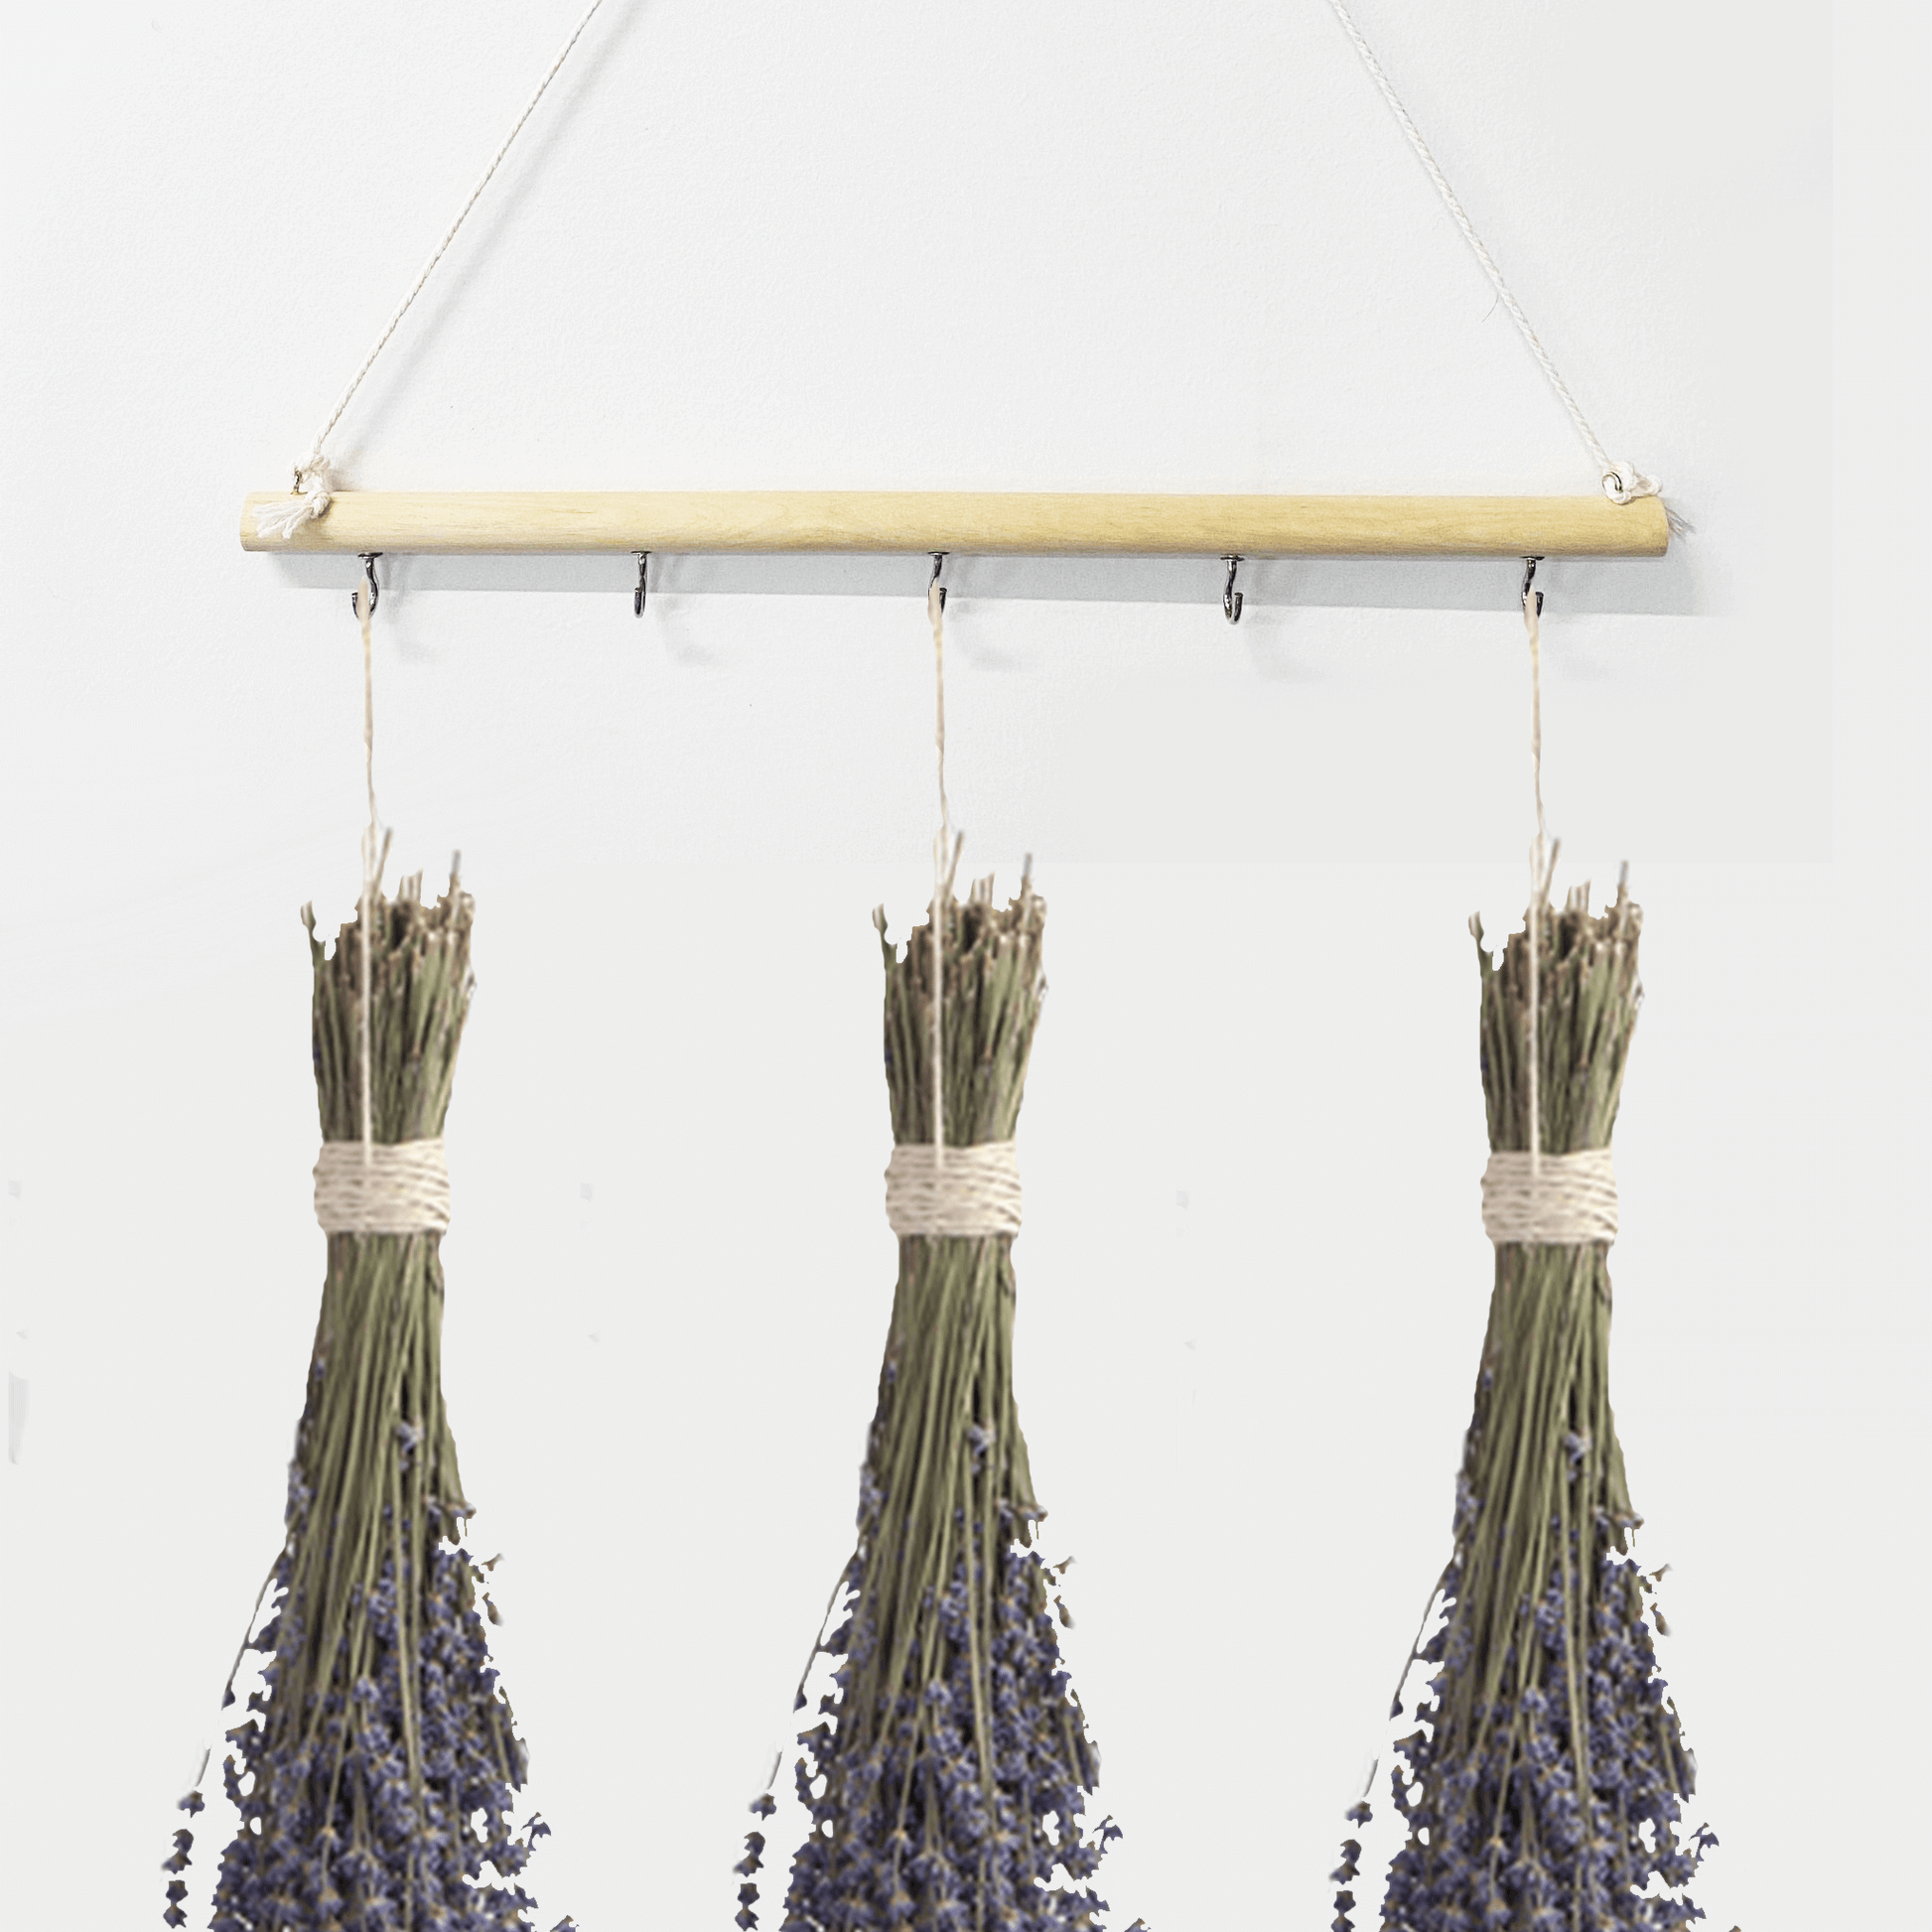 Herb Drying Rack at $25 only from Spiral Rain